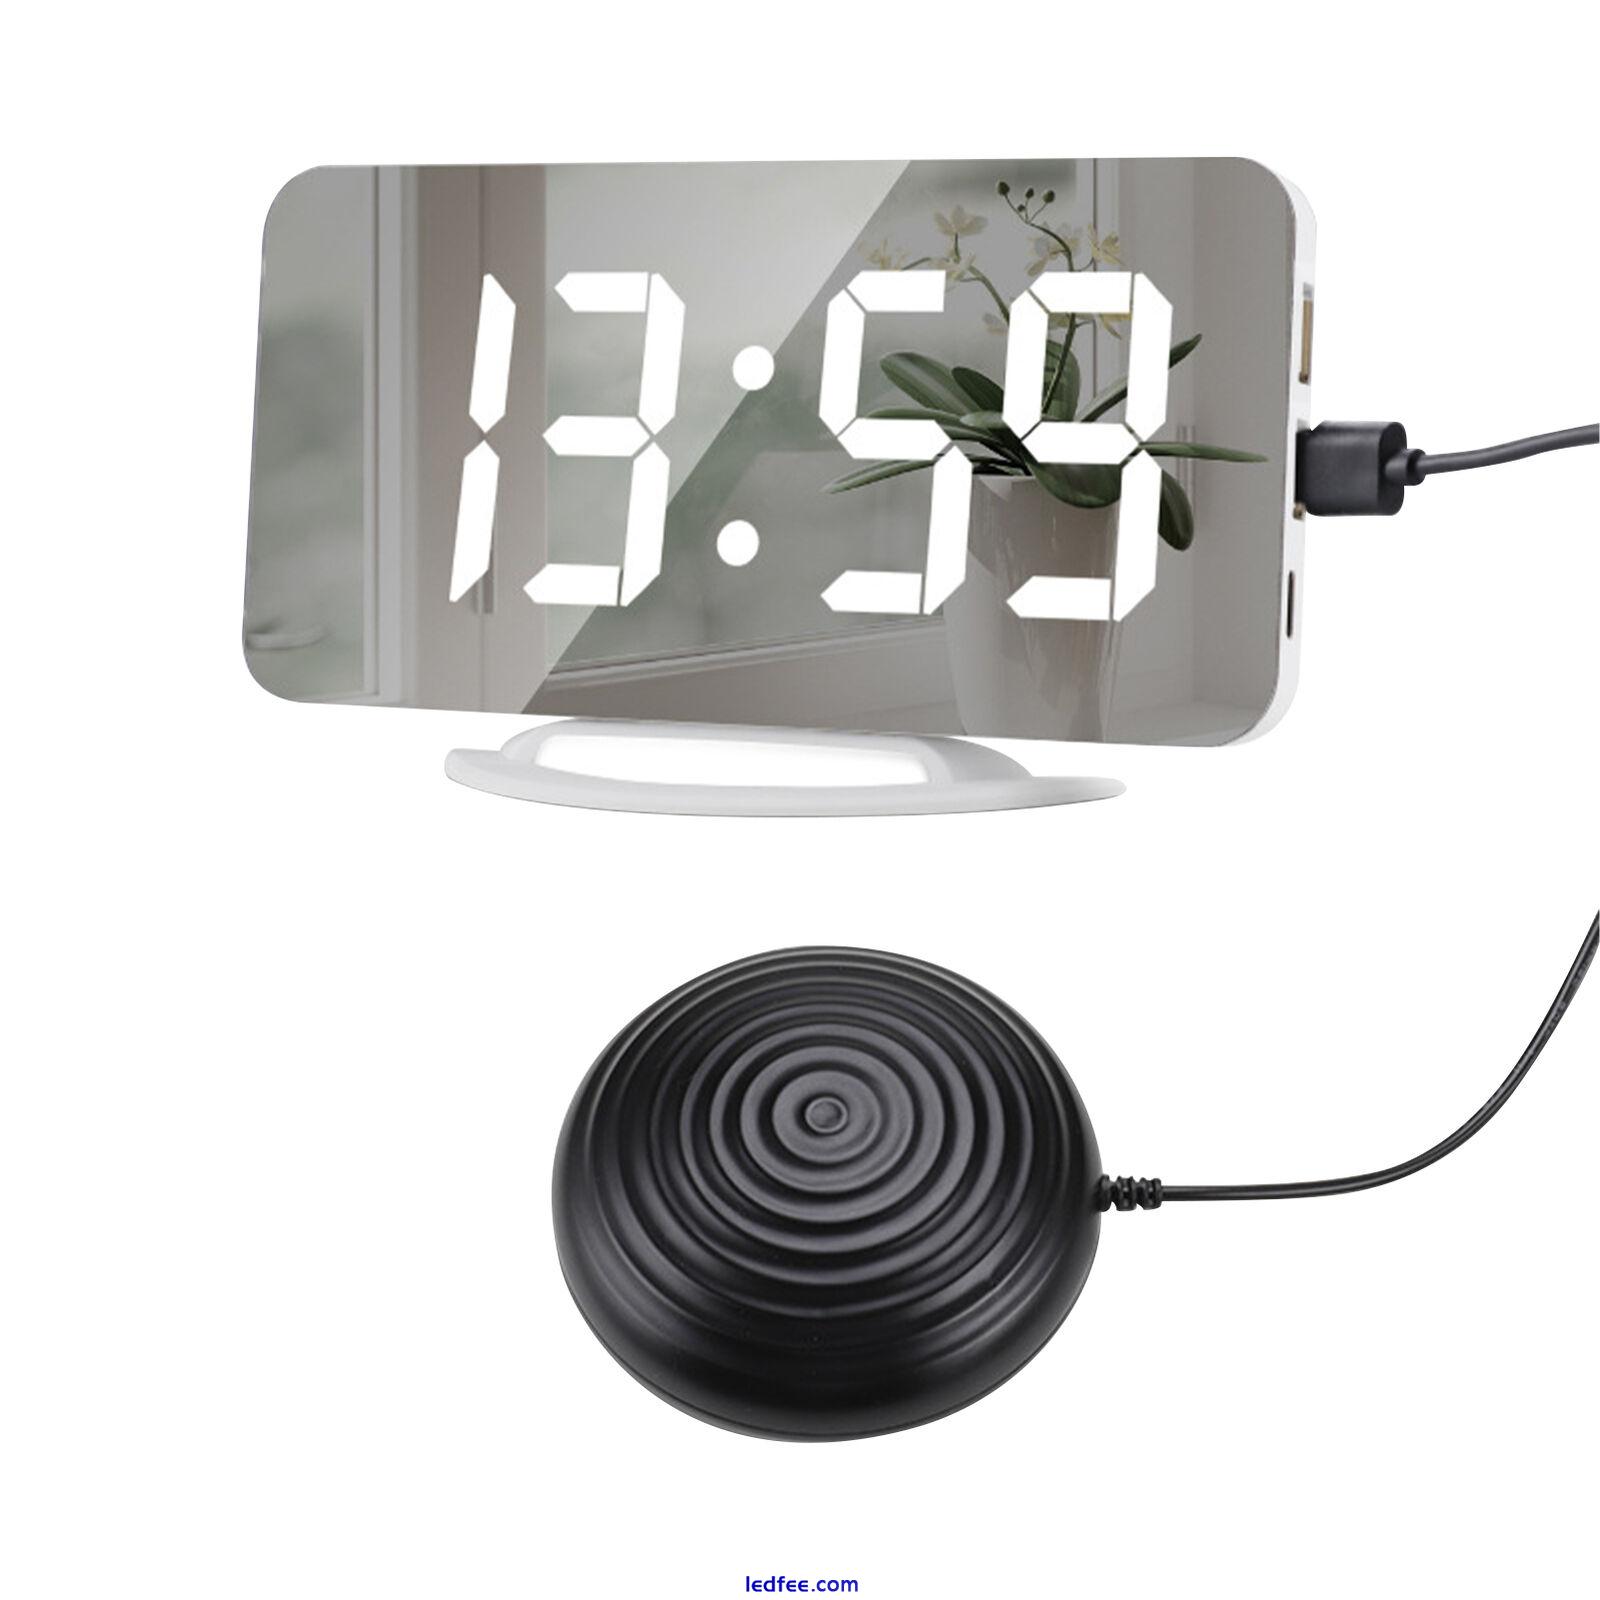 With Bed Shaker LED Mirror USB Ports Loud Digital Alarm Clock Home Office 4 